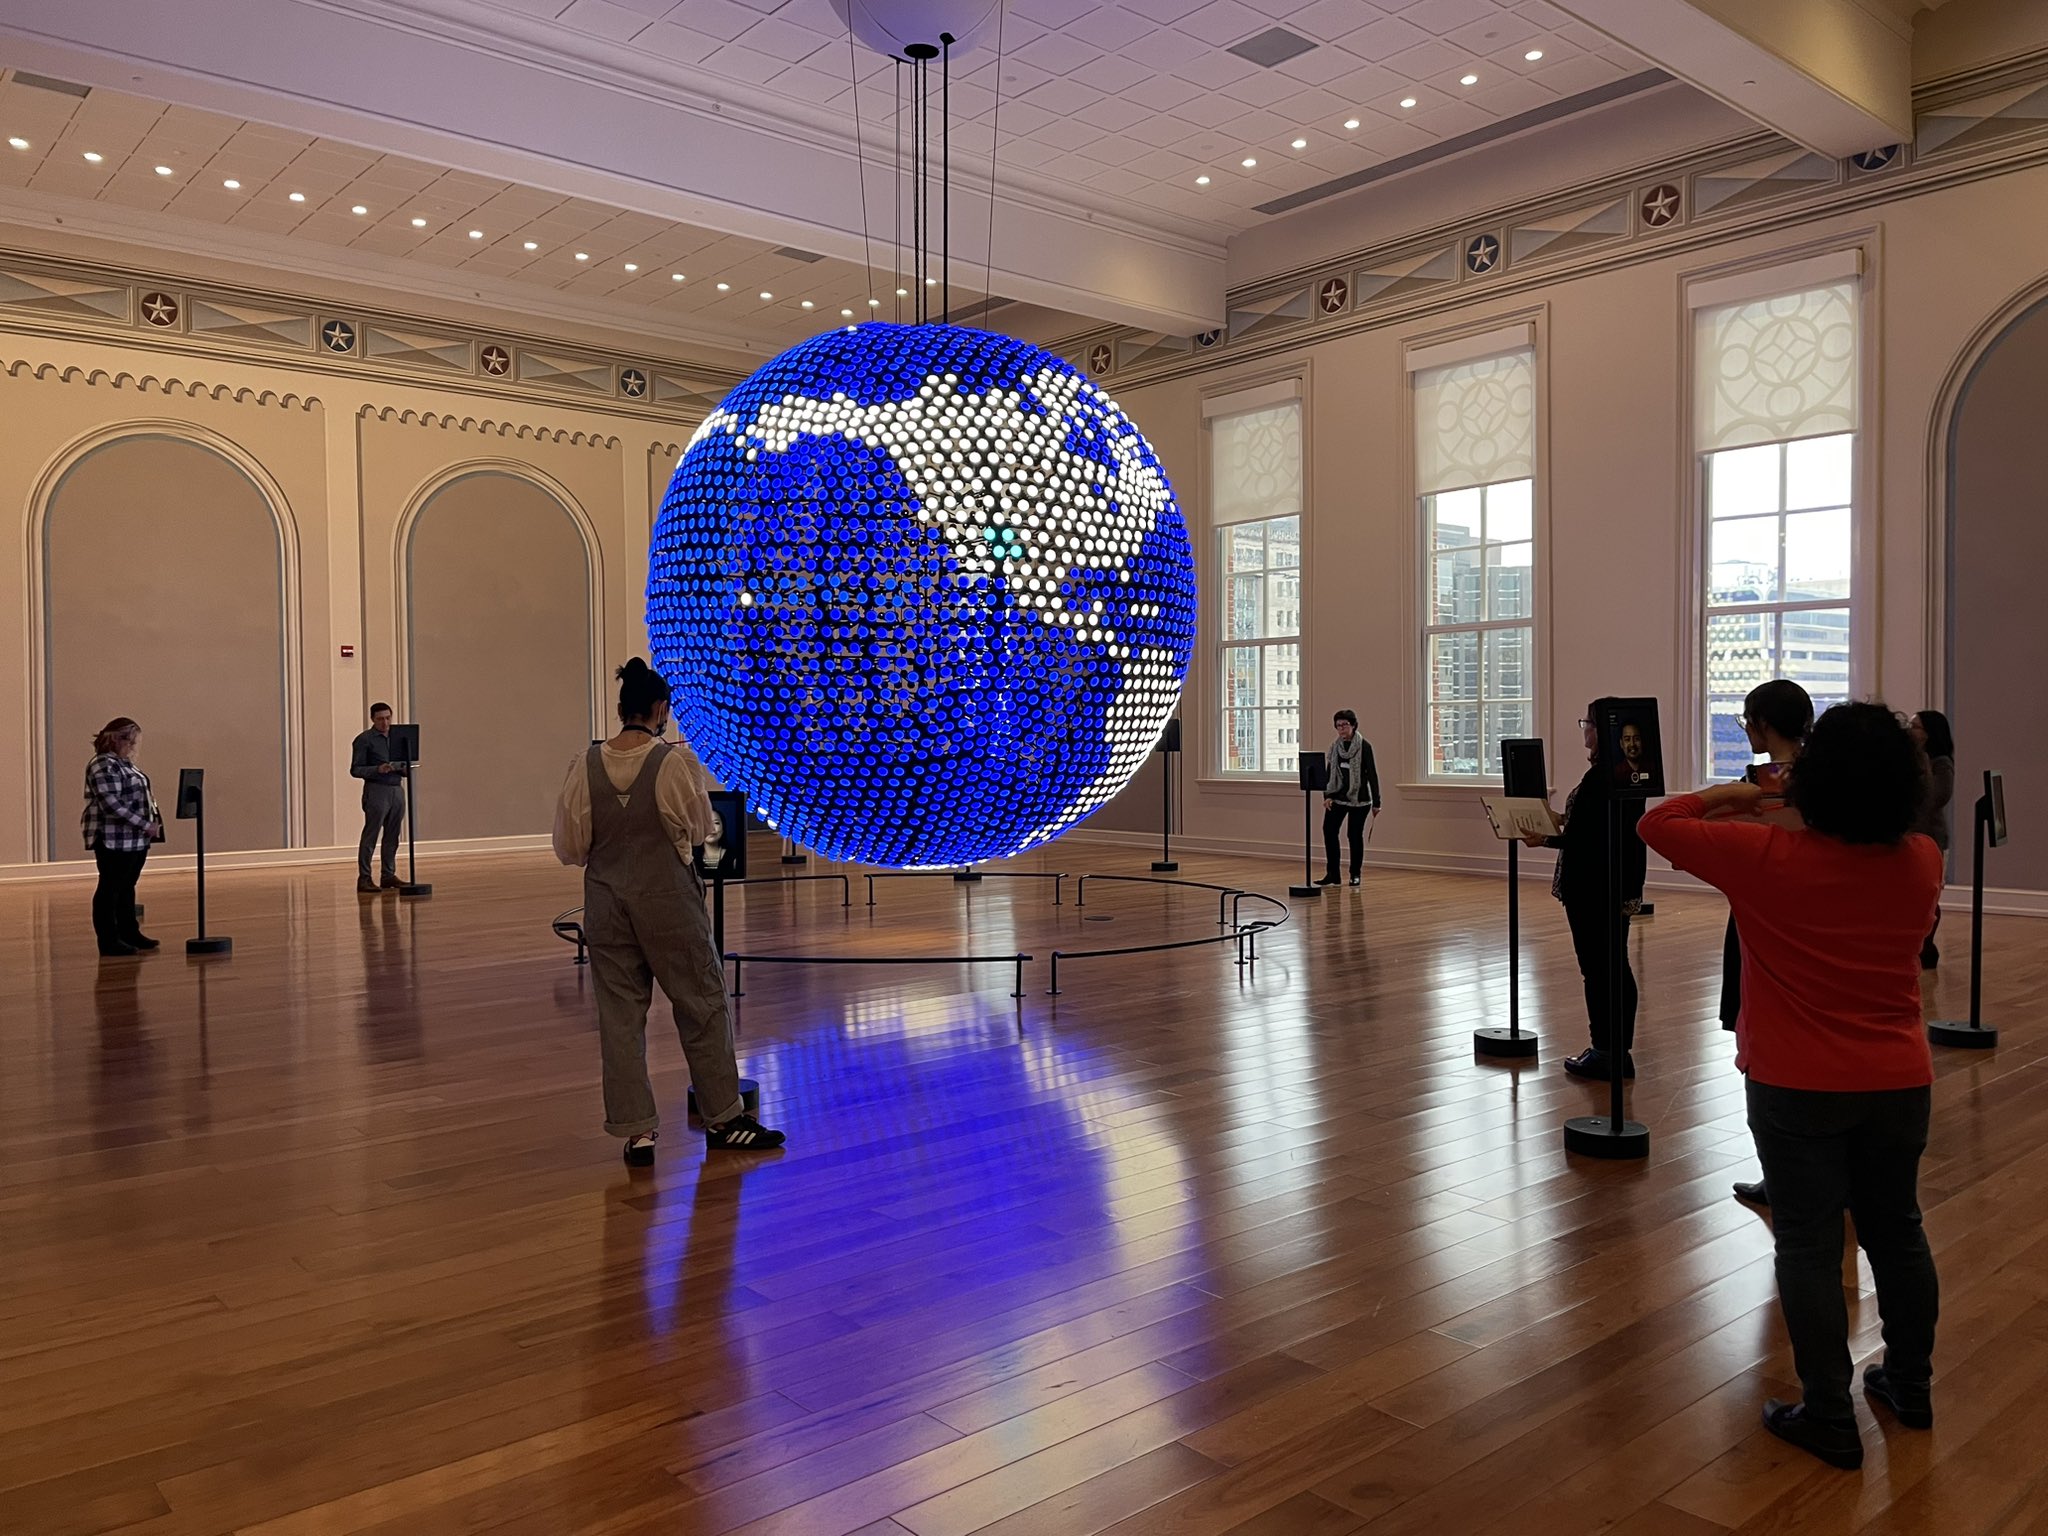 Teachers and visitors inside the Planet Word Museum World Languages gallery. A bright, glowing, blue globe hangs from the center of the ceiling.